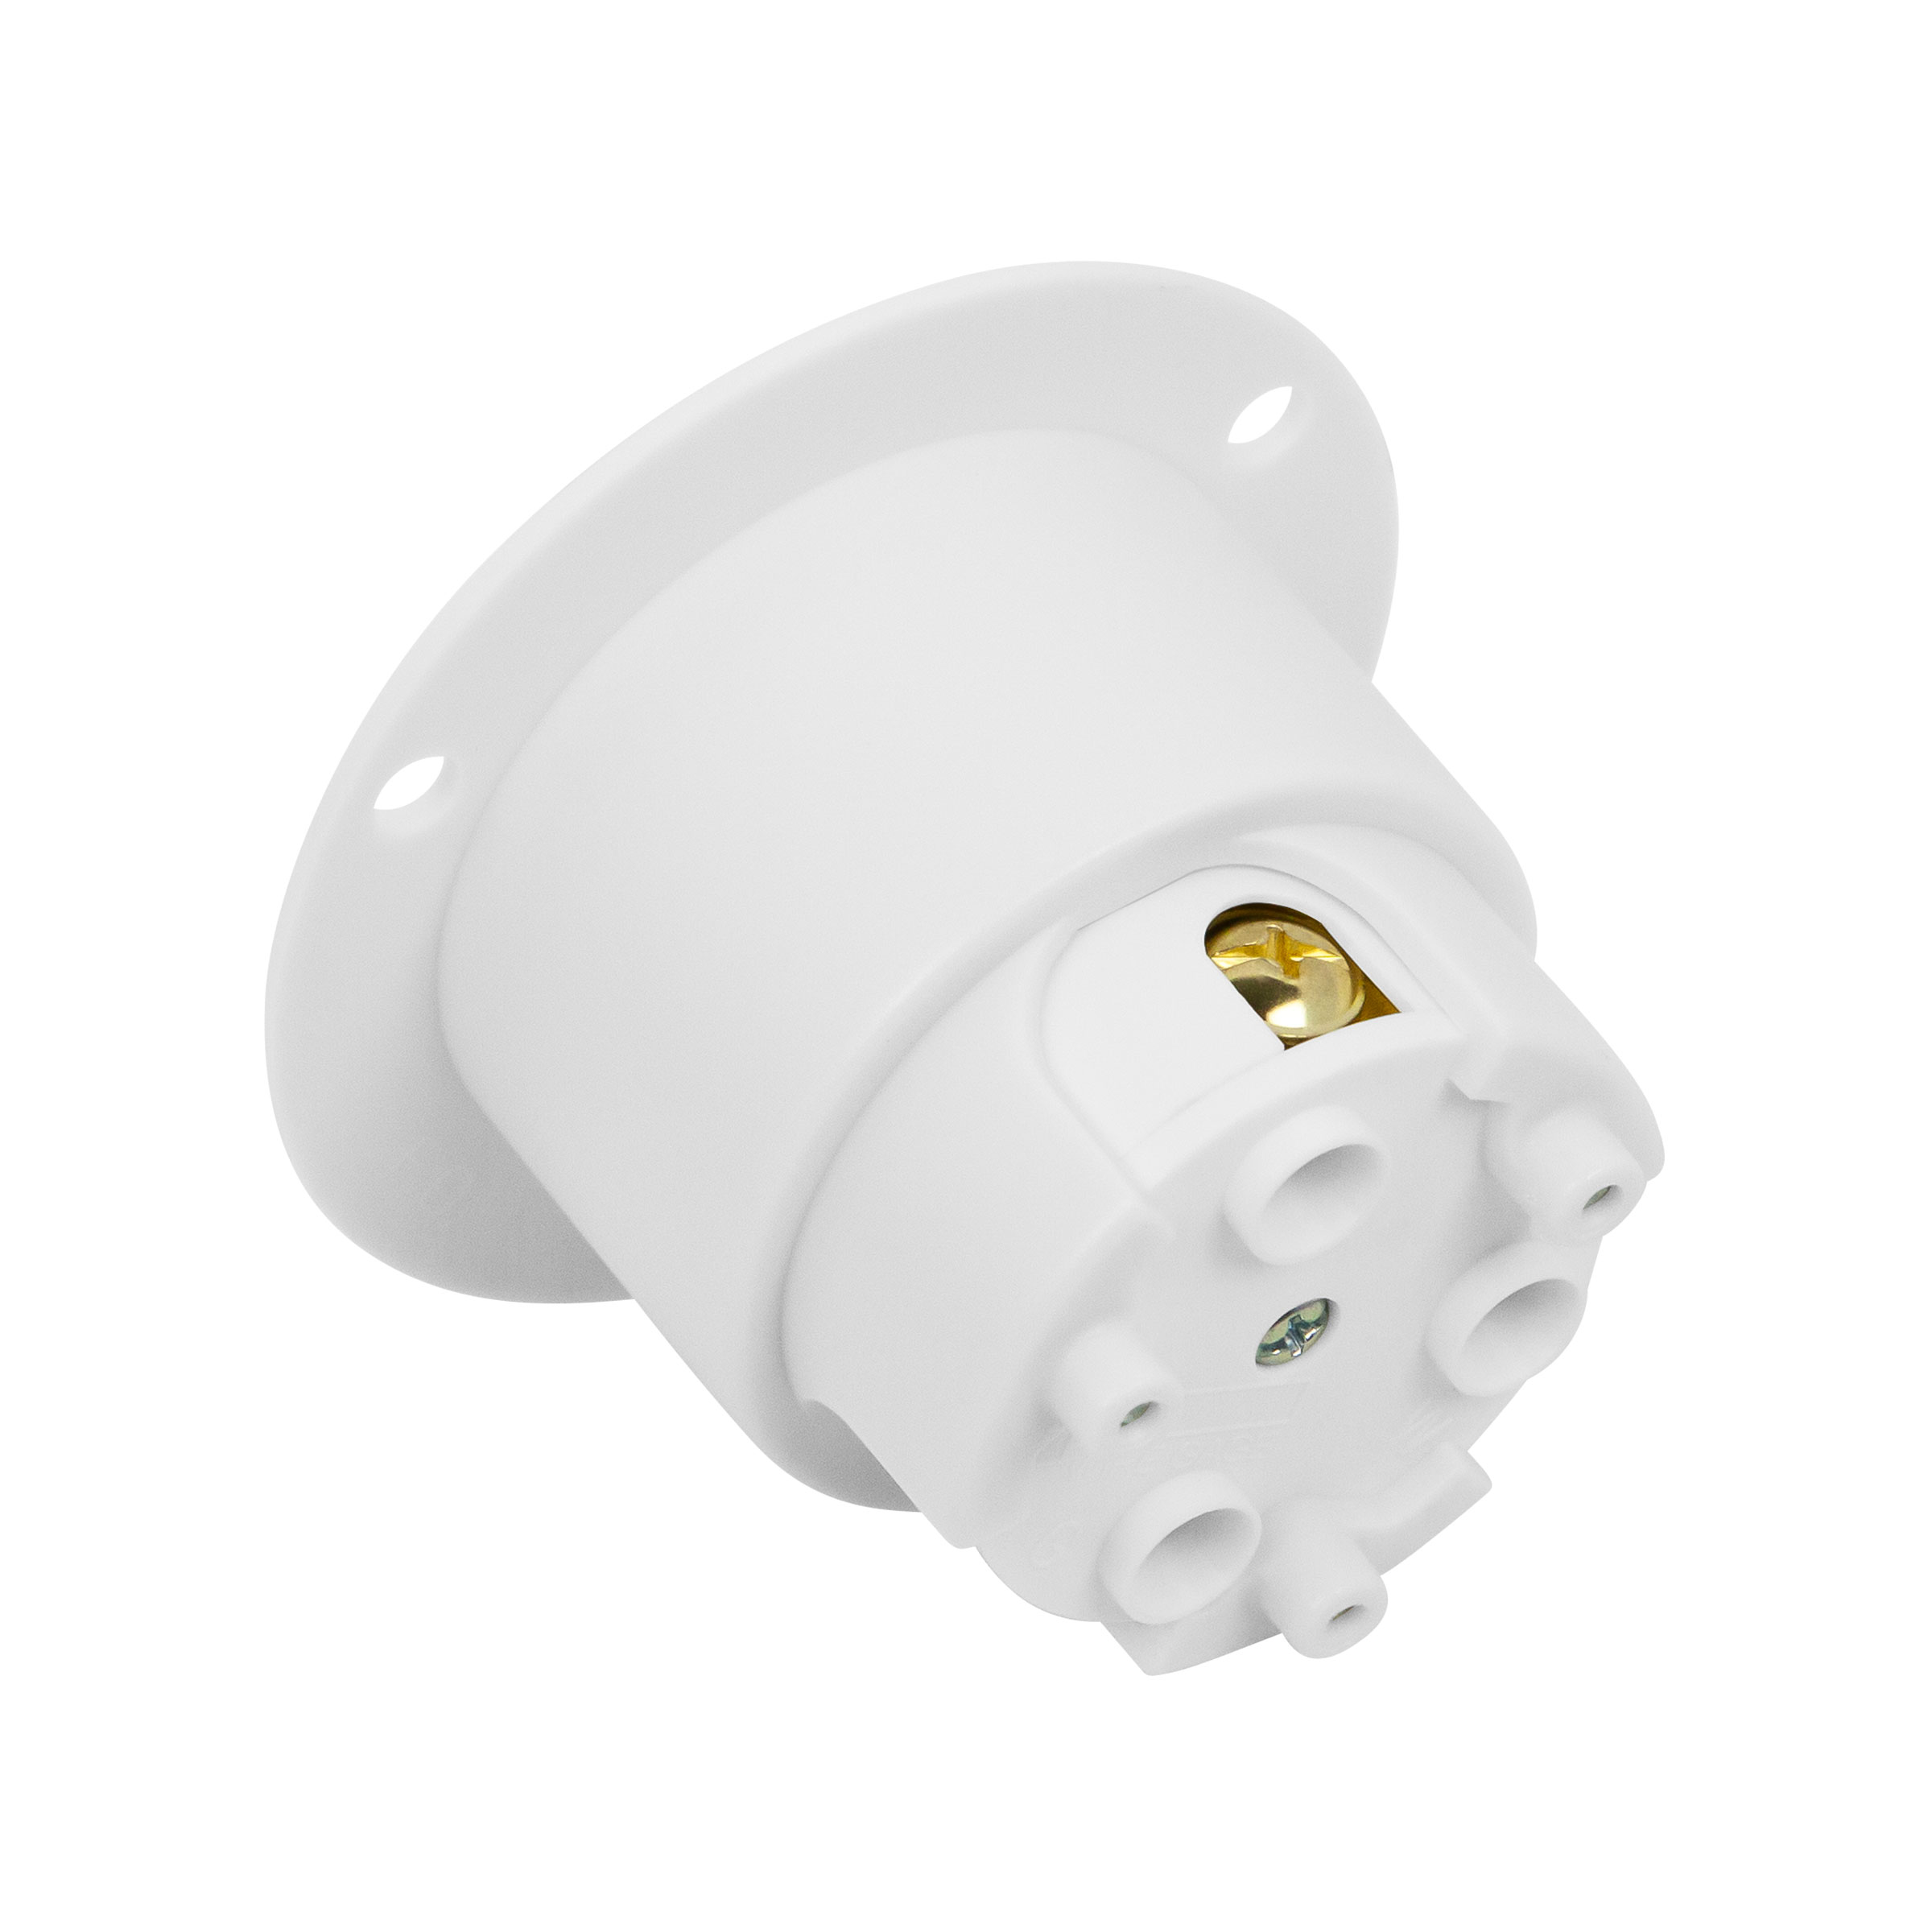 NEMA L5-30 Flanged Outlet Locking Plug Charger Receptacle 30 Amp White